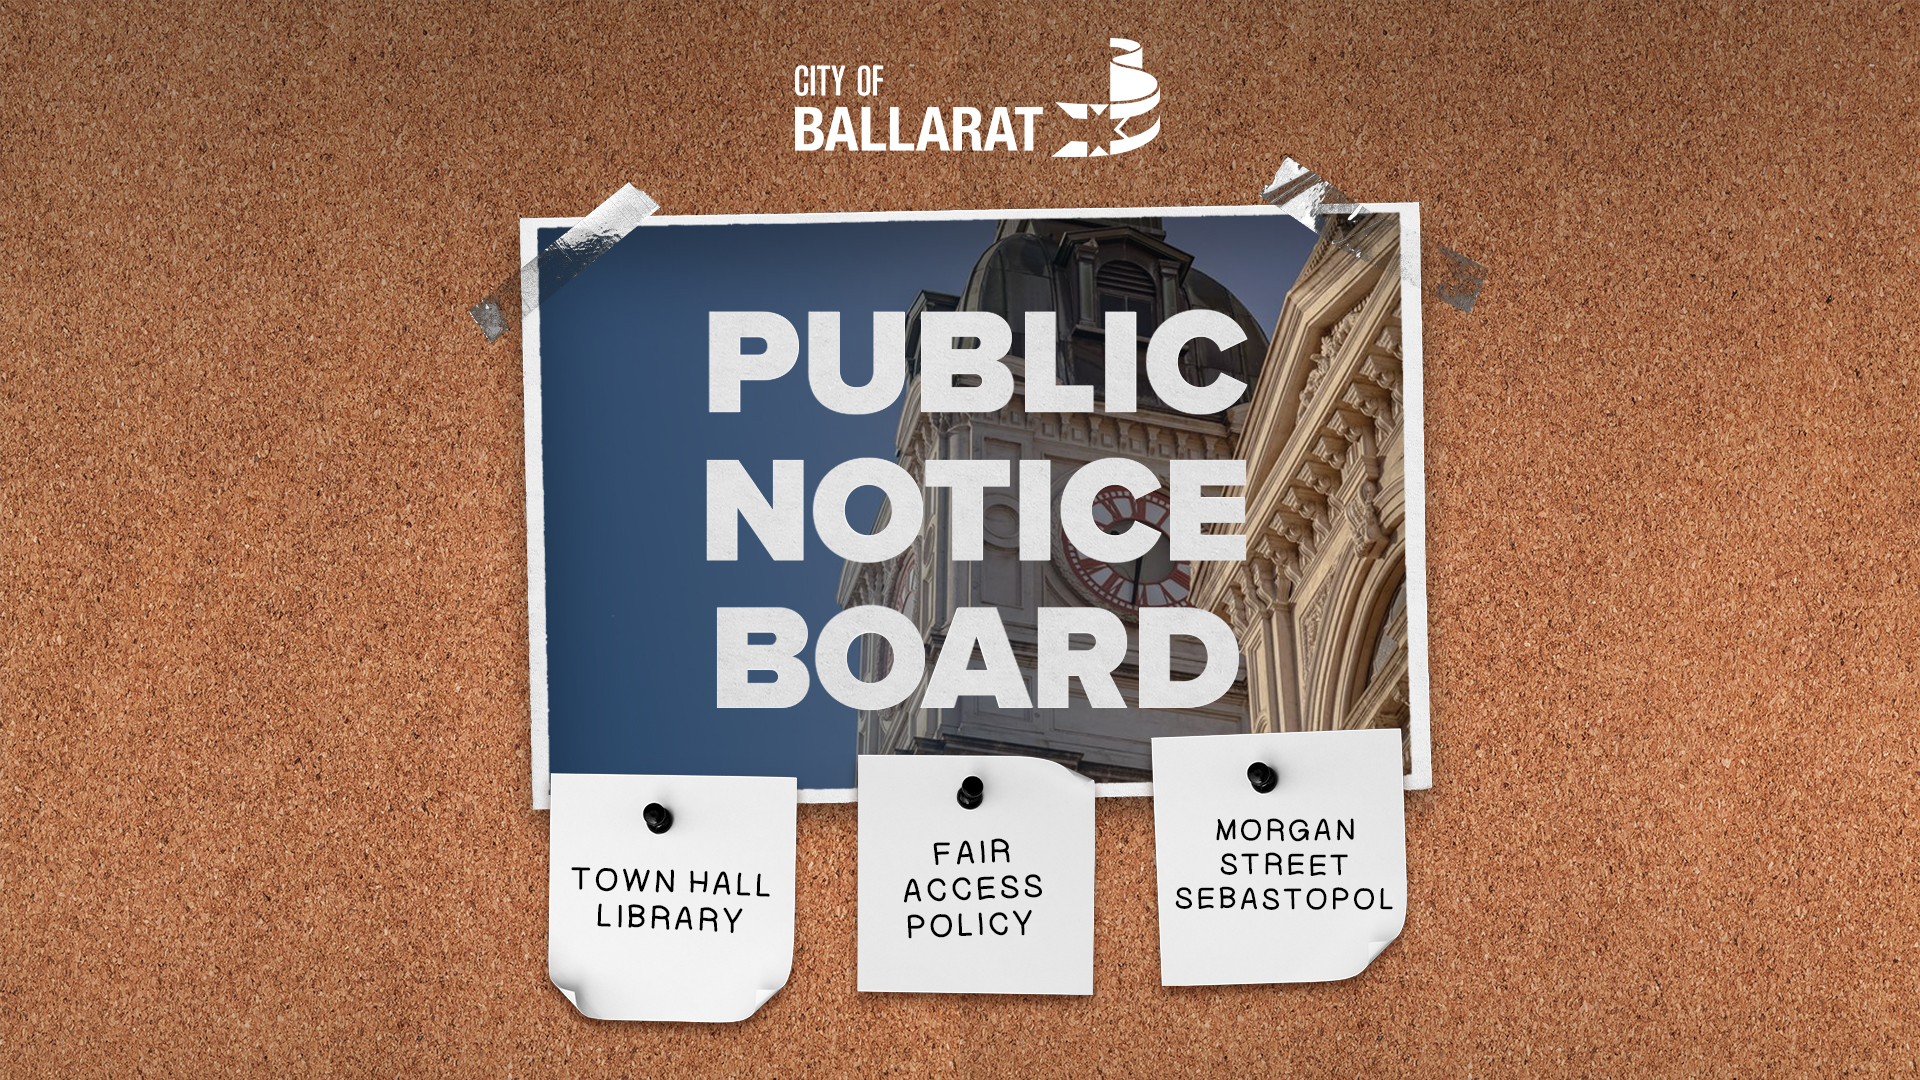 Notice board with Public Notice Board text over an image of Ballarat Town Hall. Three notes underneath with text saying Town Hall Library, Fair Access Policy, Morgan Street Sebastopol